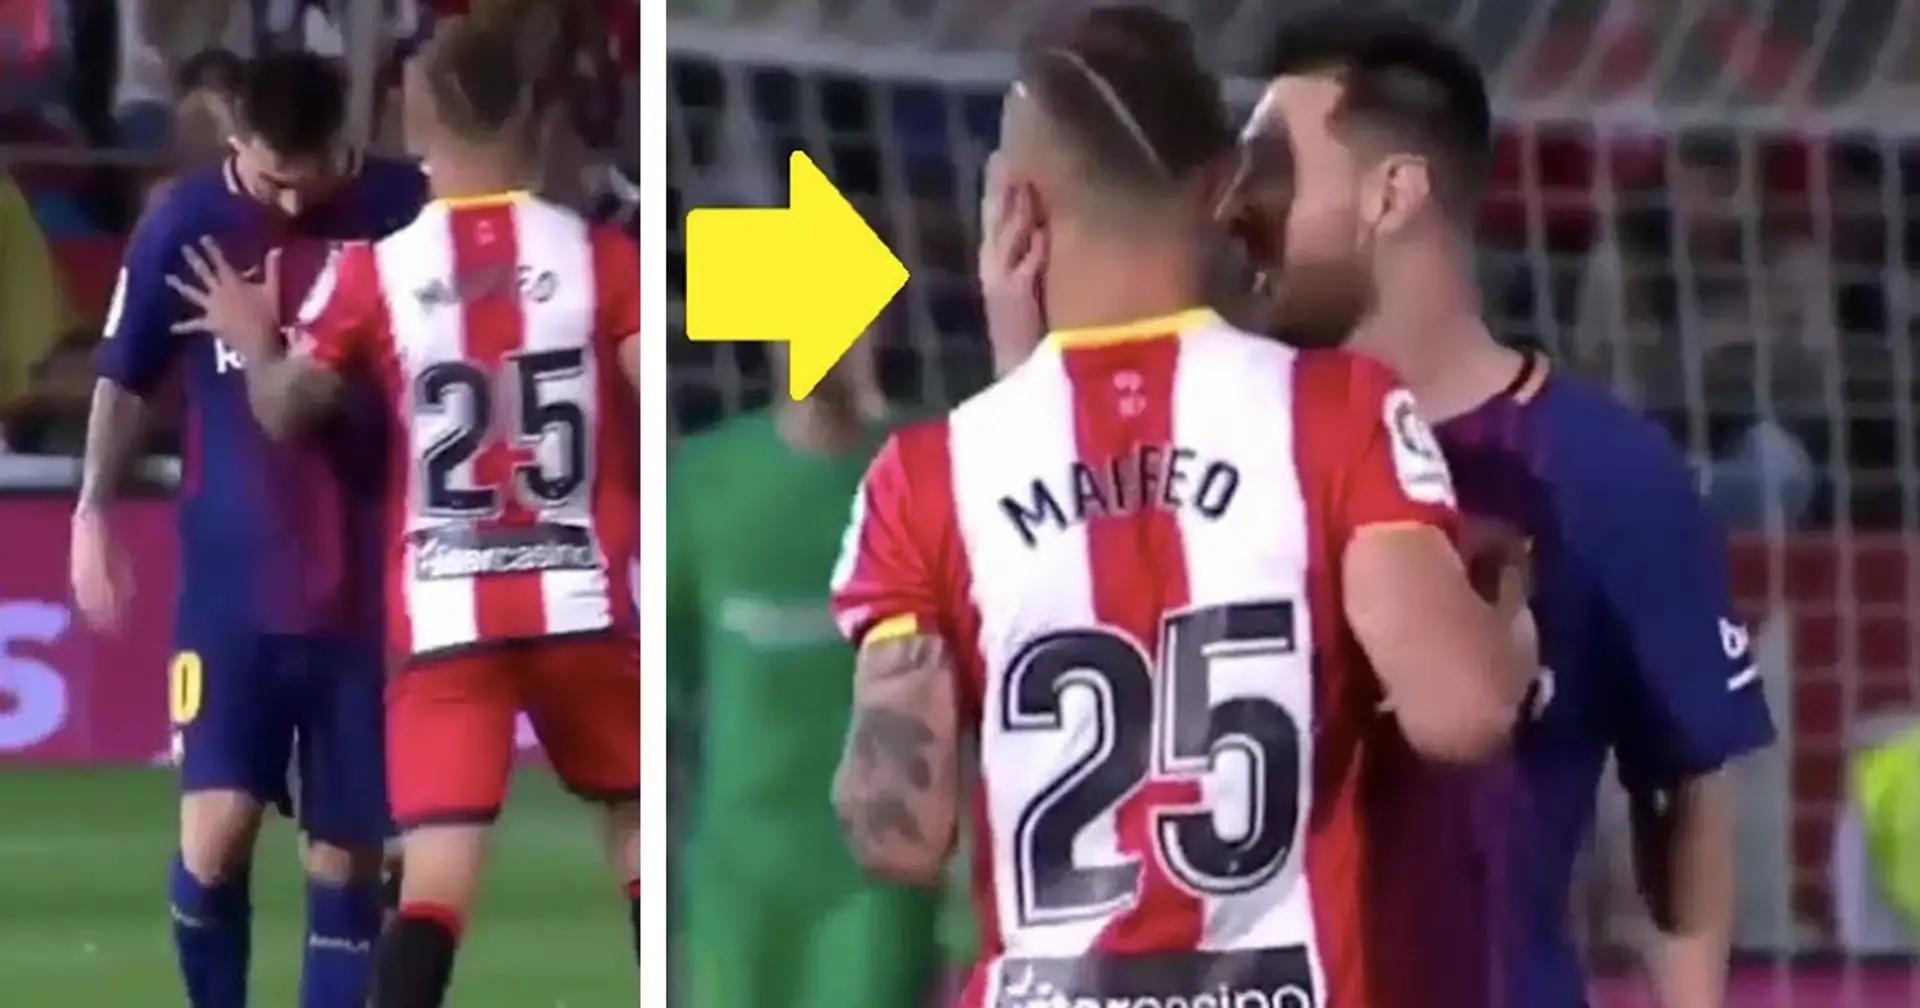 'Messi told me 'I've got you here for the whole day'': Throwback to one of the nicest pitch talks - as per defender Pablo Maffeo